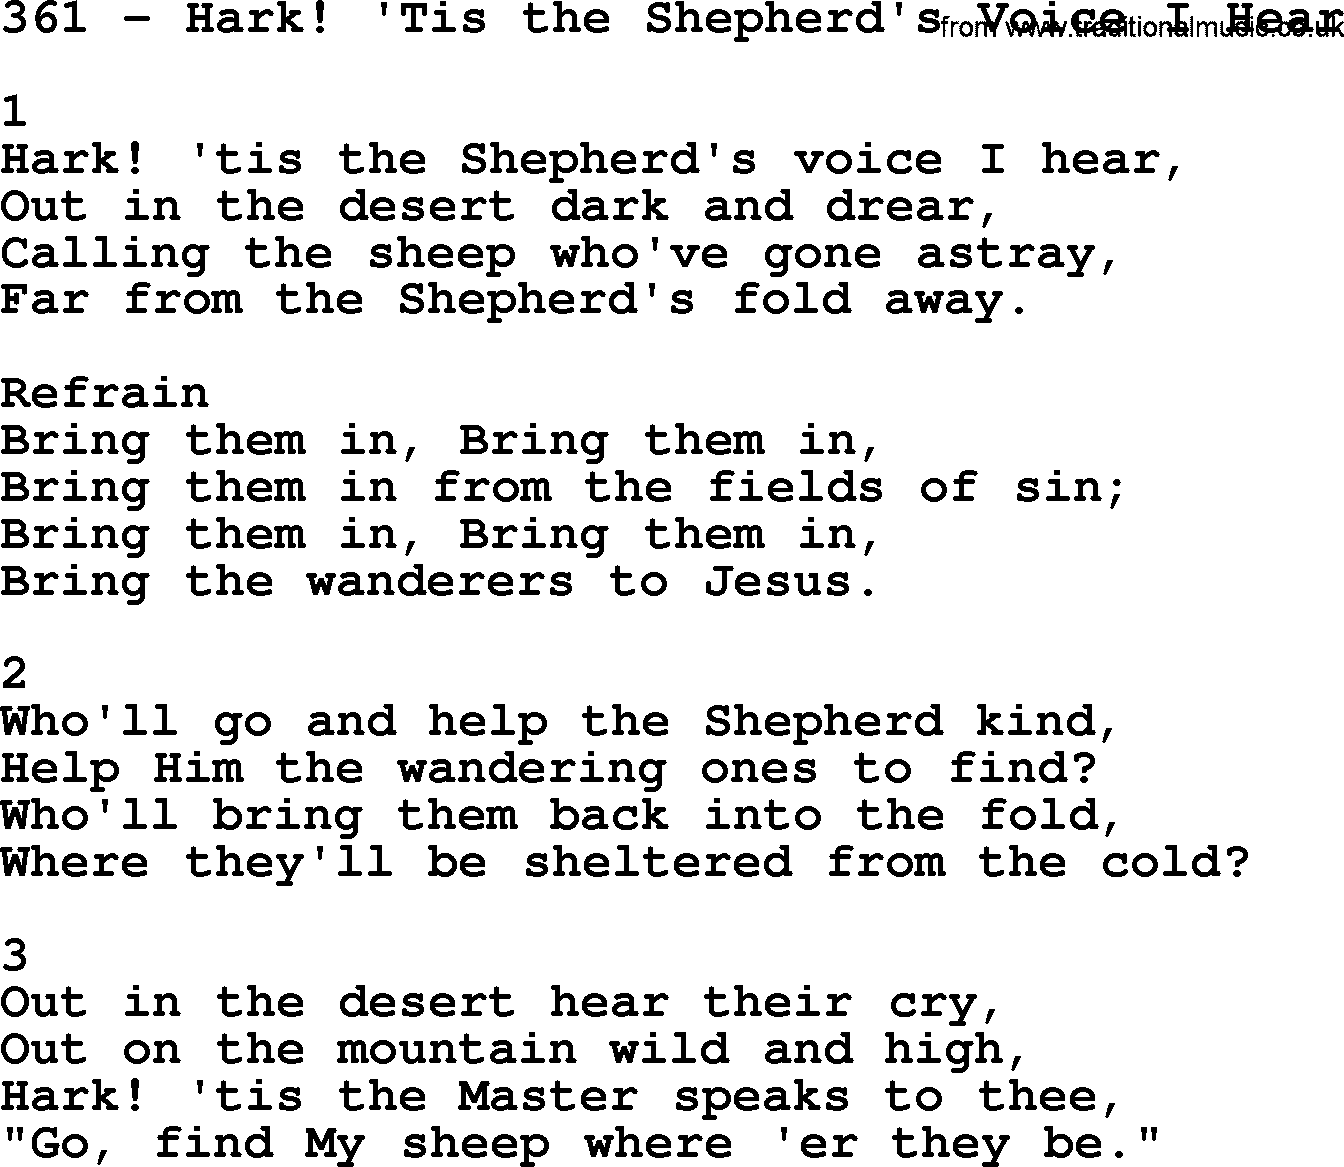 Complete Adventis Hymnal, title: 361-Hark! 'Tis The Shepherd's Voice I Hear, with lyrics, midi, mp3, powerpoints(PPT) and PDF,